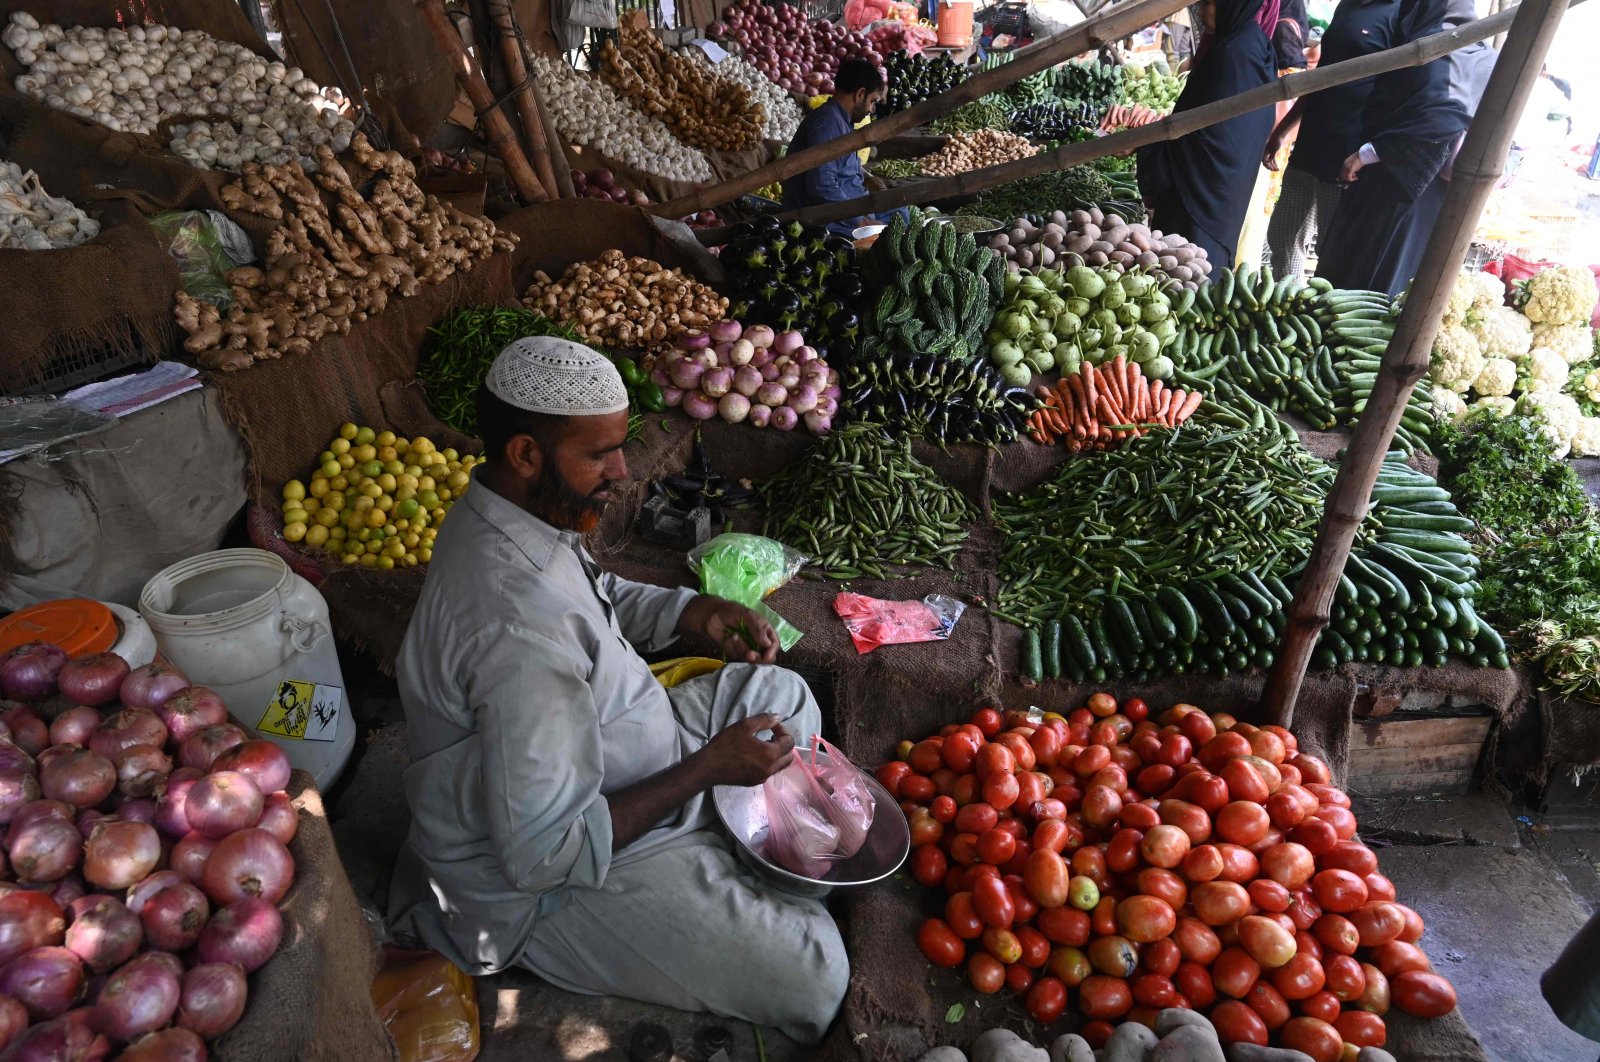 A vendor weighs vegetables for a customer at a local market in Lahore, Pakistan, Aug. 29, 2022. (AFP Photo)